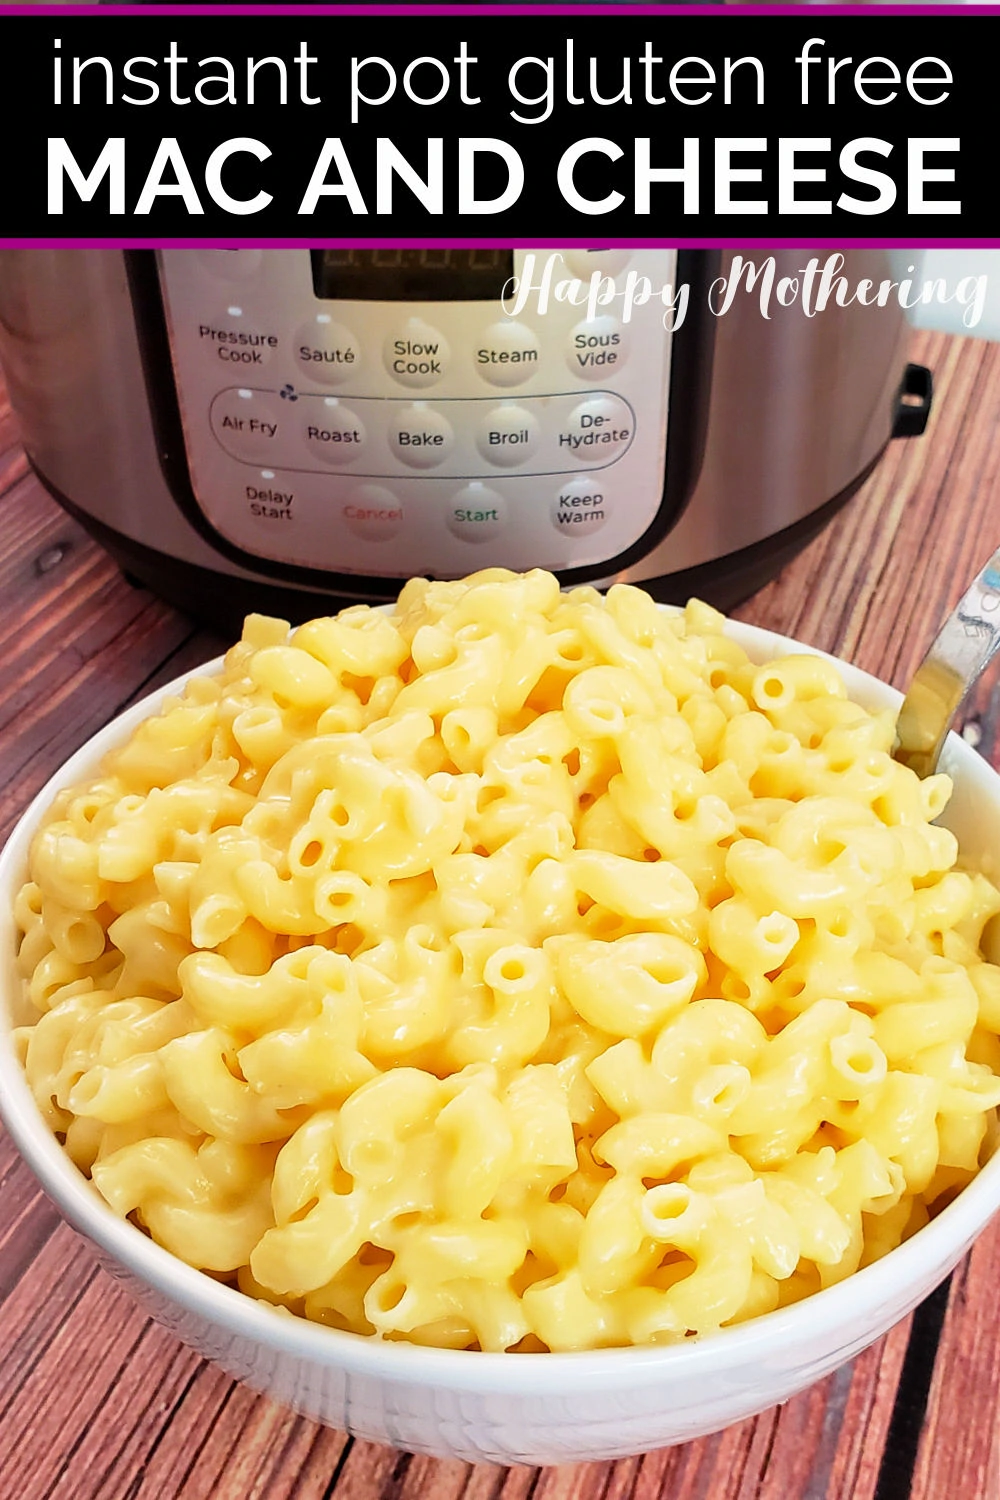 Bowl of gluten free mac and cheese next to Instant Pot.